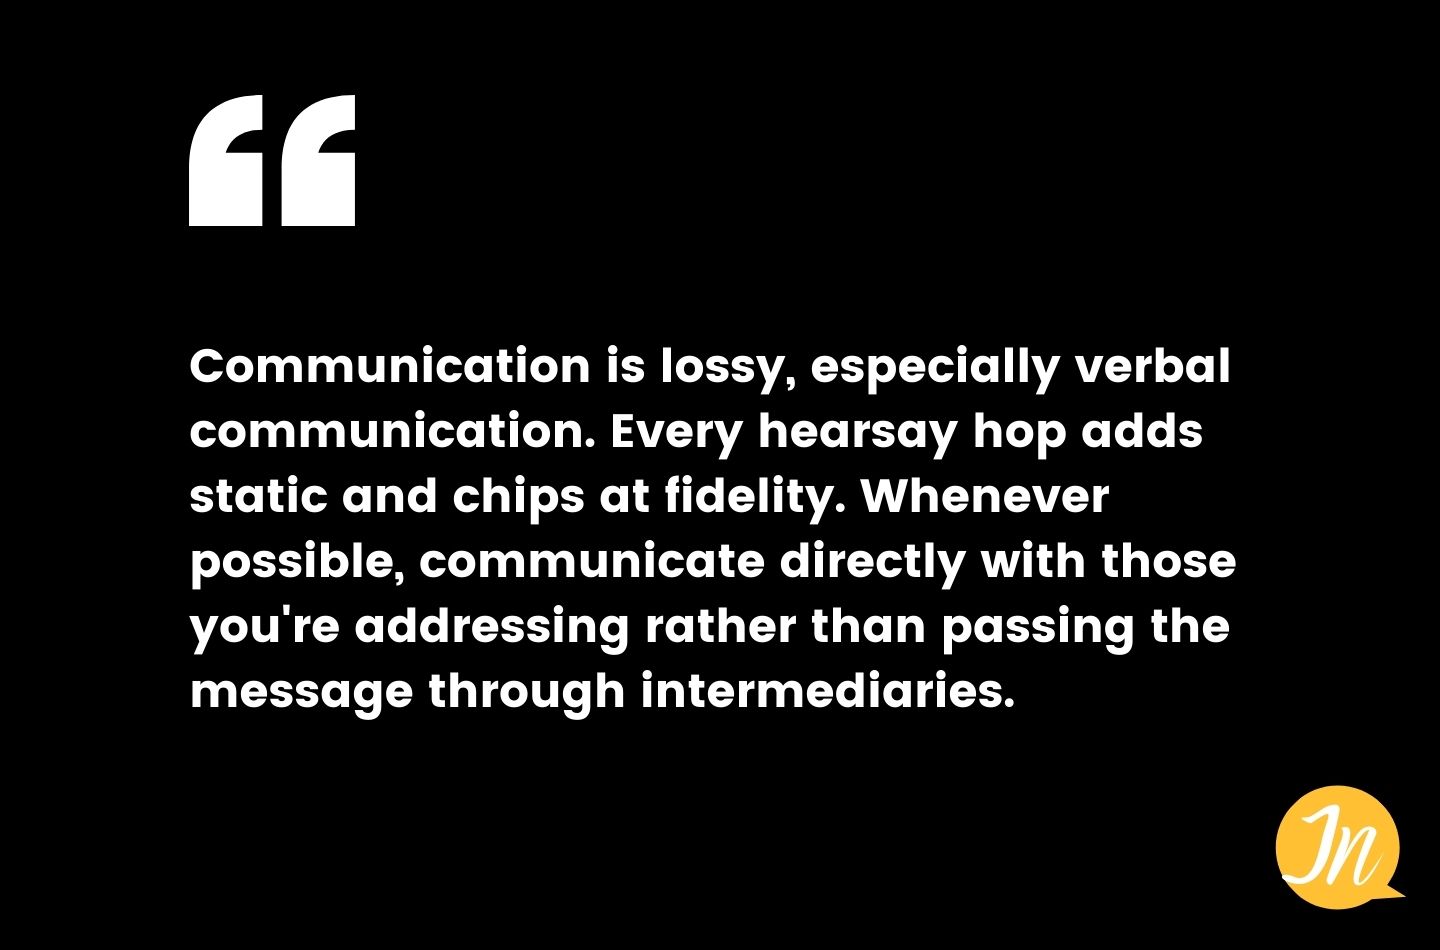 Communication is lossy, especially verbal communication.